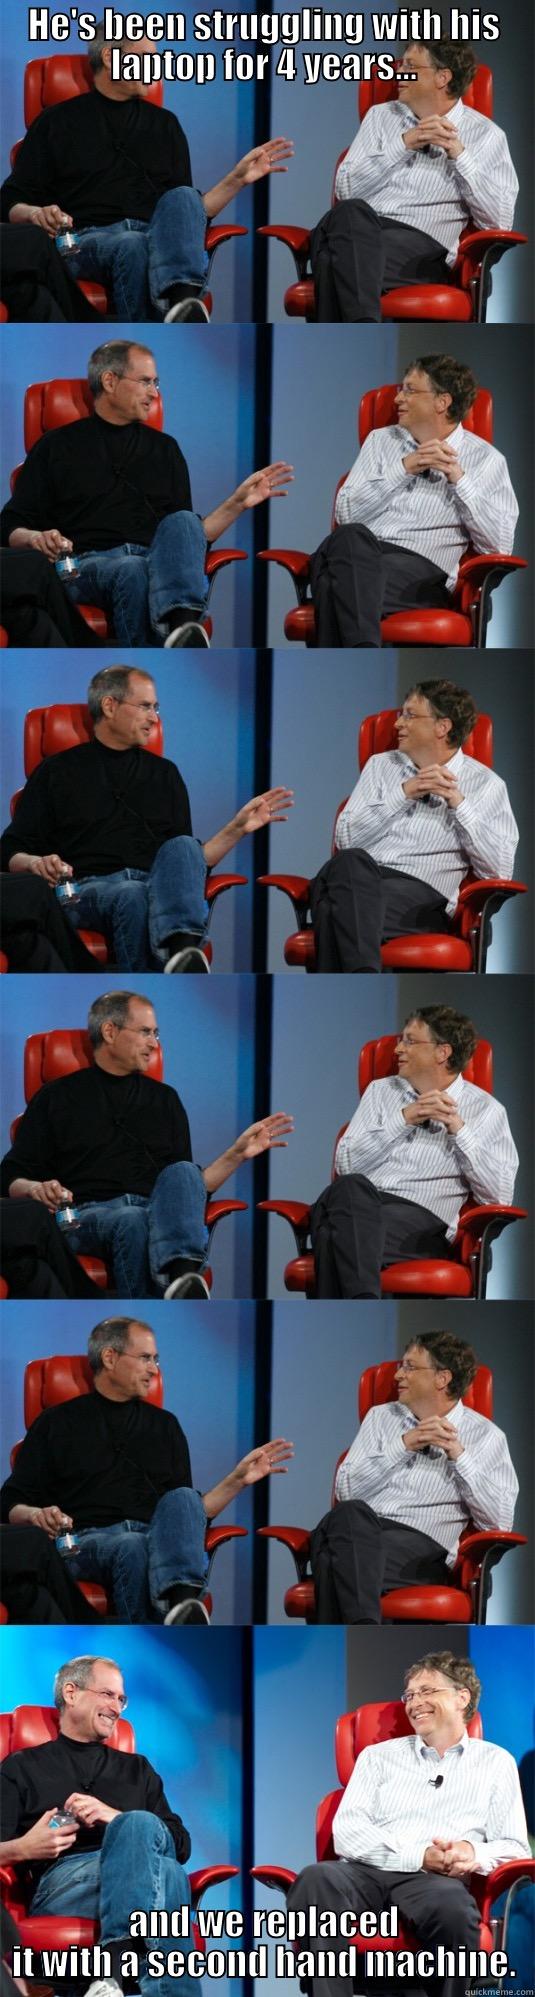 HE'S BEEN STRUGGLING WITH HIS LAPTOP FOR 4 YEARS... AND WE REPLACED IT WITH A SECOND HAND MACHINE. Steve Jobs vs Bill Gates